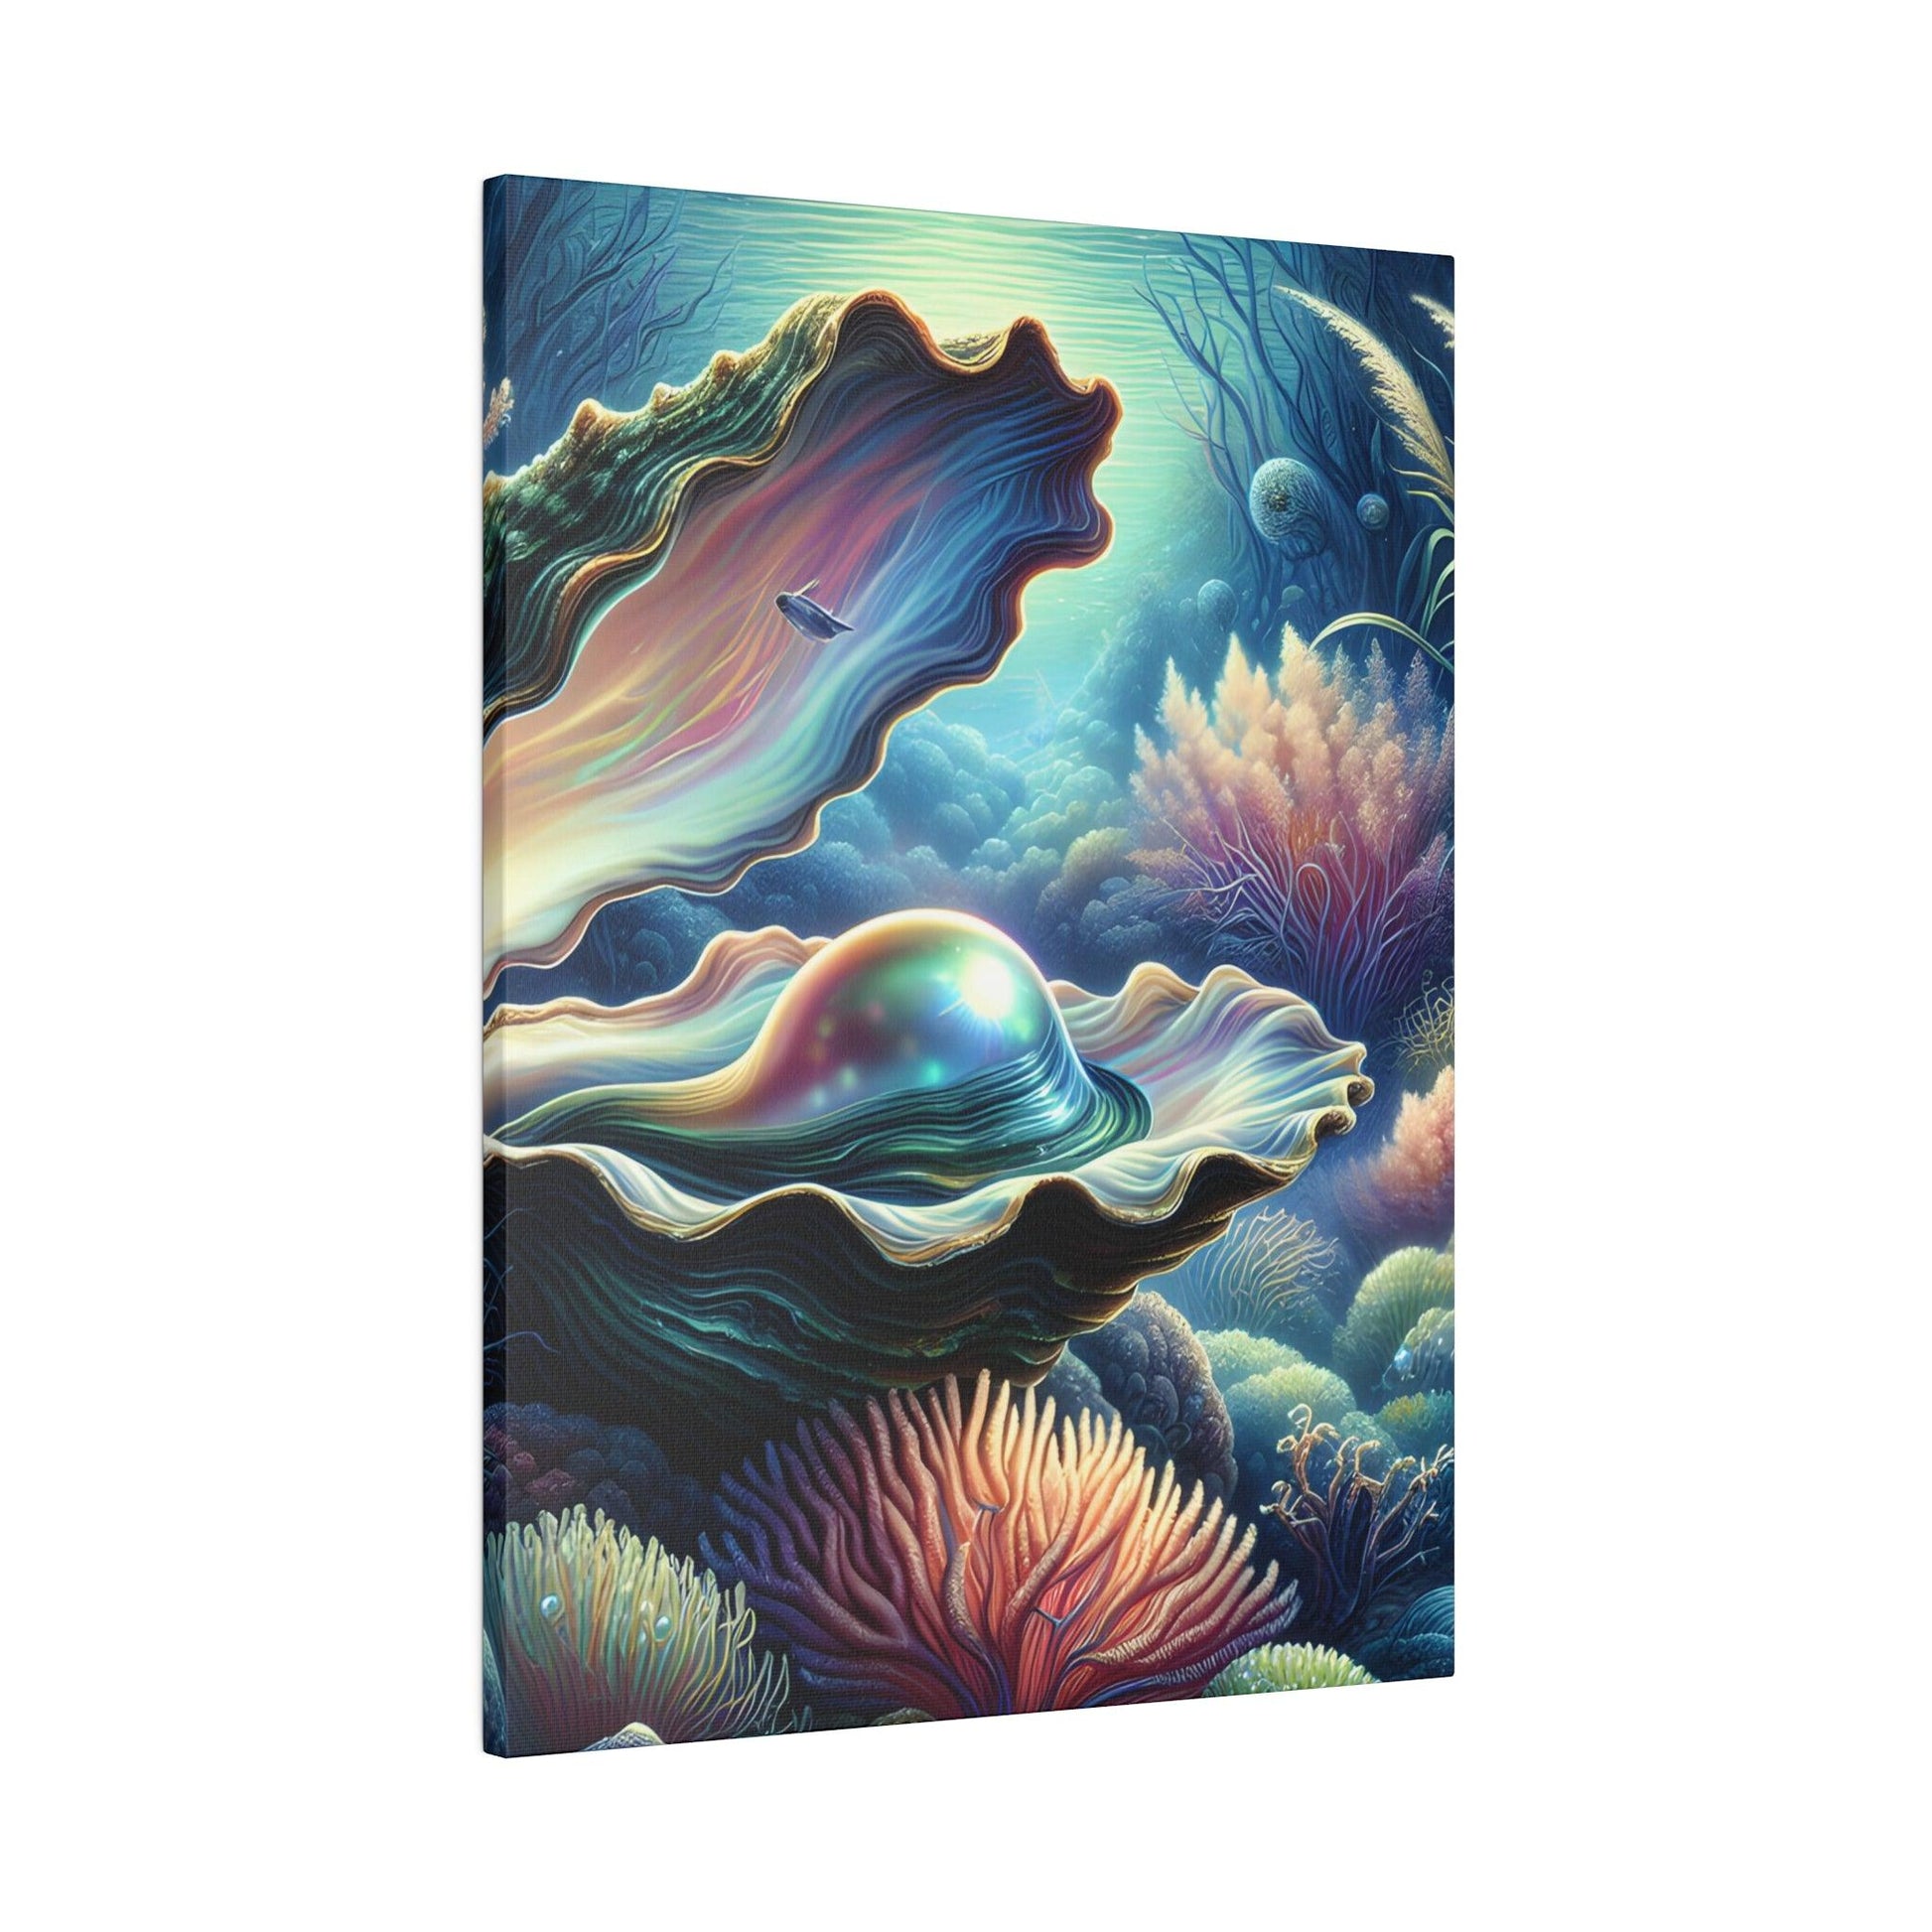 "Oyster Elegance: Premium Canvas Wall Art" - The Alice Gallery